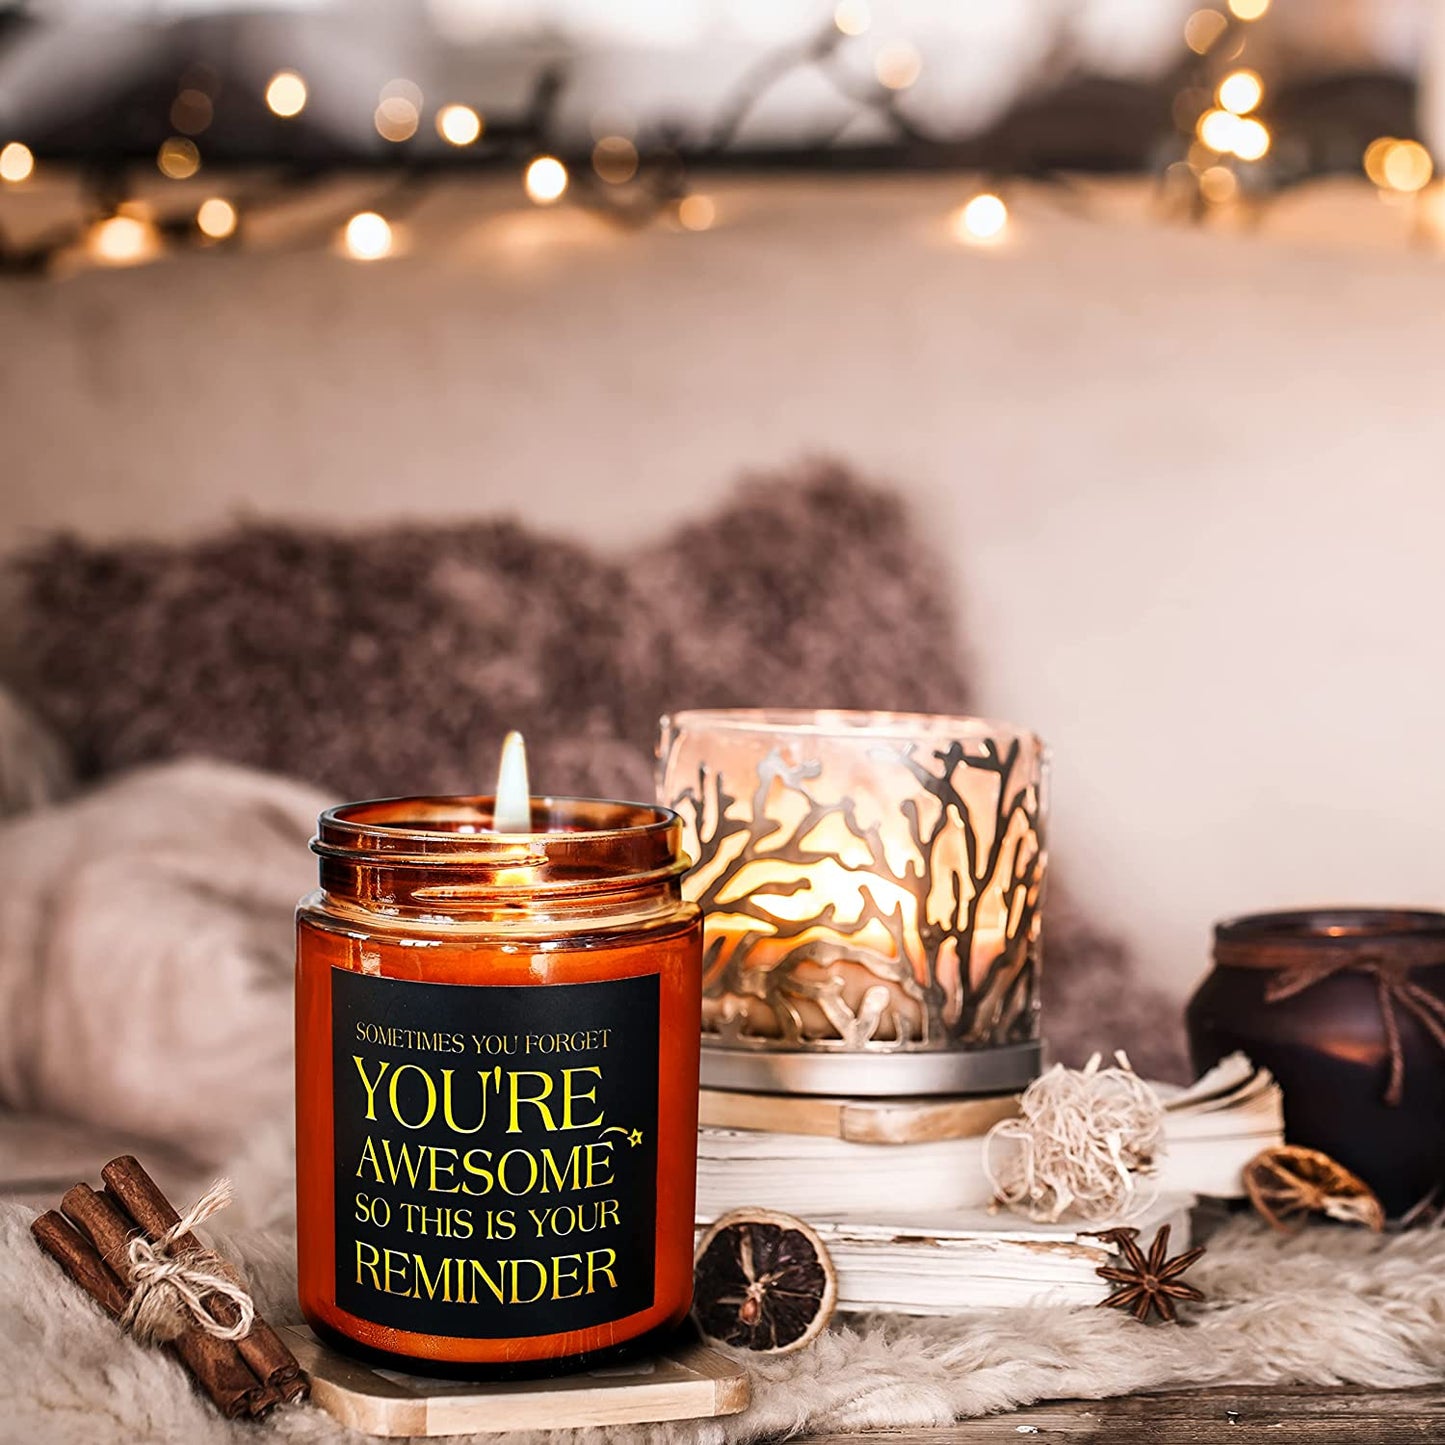 A lighted candle in a jar is on a table. It has a quote printed on it which says, "Sometimes You Forget You’re Awesome So This Is Your Reminder.”